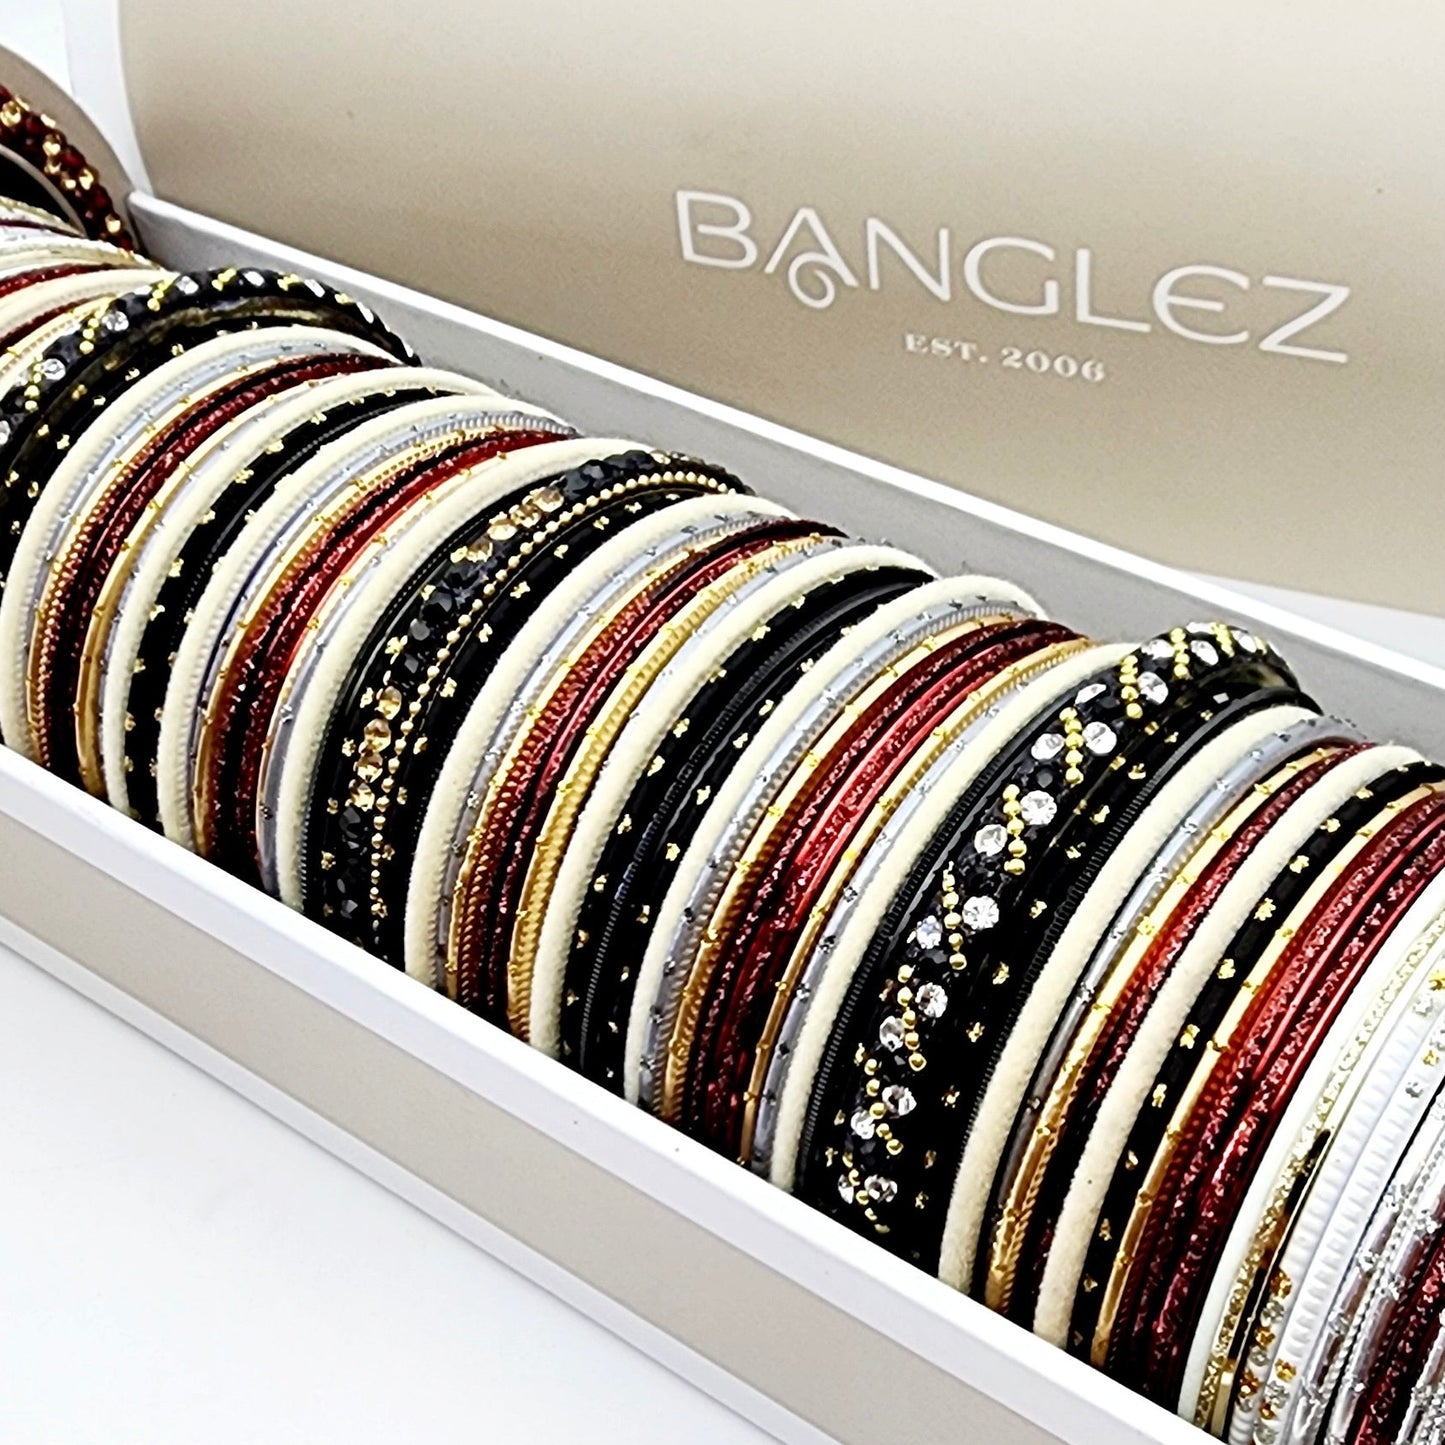 Load image into Gallery viewer, Bailey Banglez Chest Indian Bangles , South Asian Bangles , Pakistani Bangles , Desi Bangles , Punjabi Bangles , Tamil Bangles , Indian Jewelry
